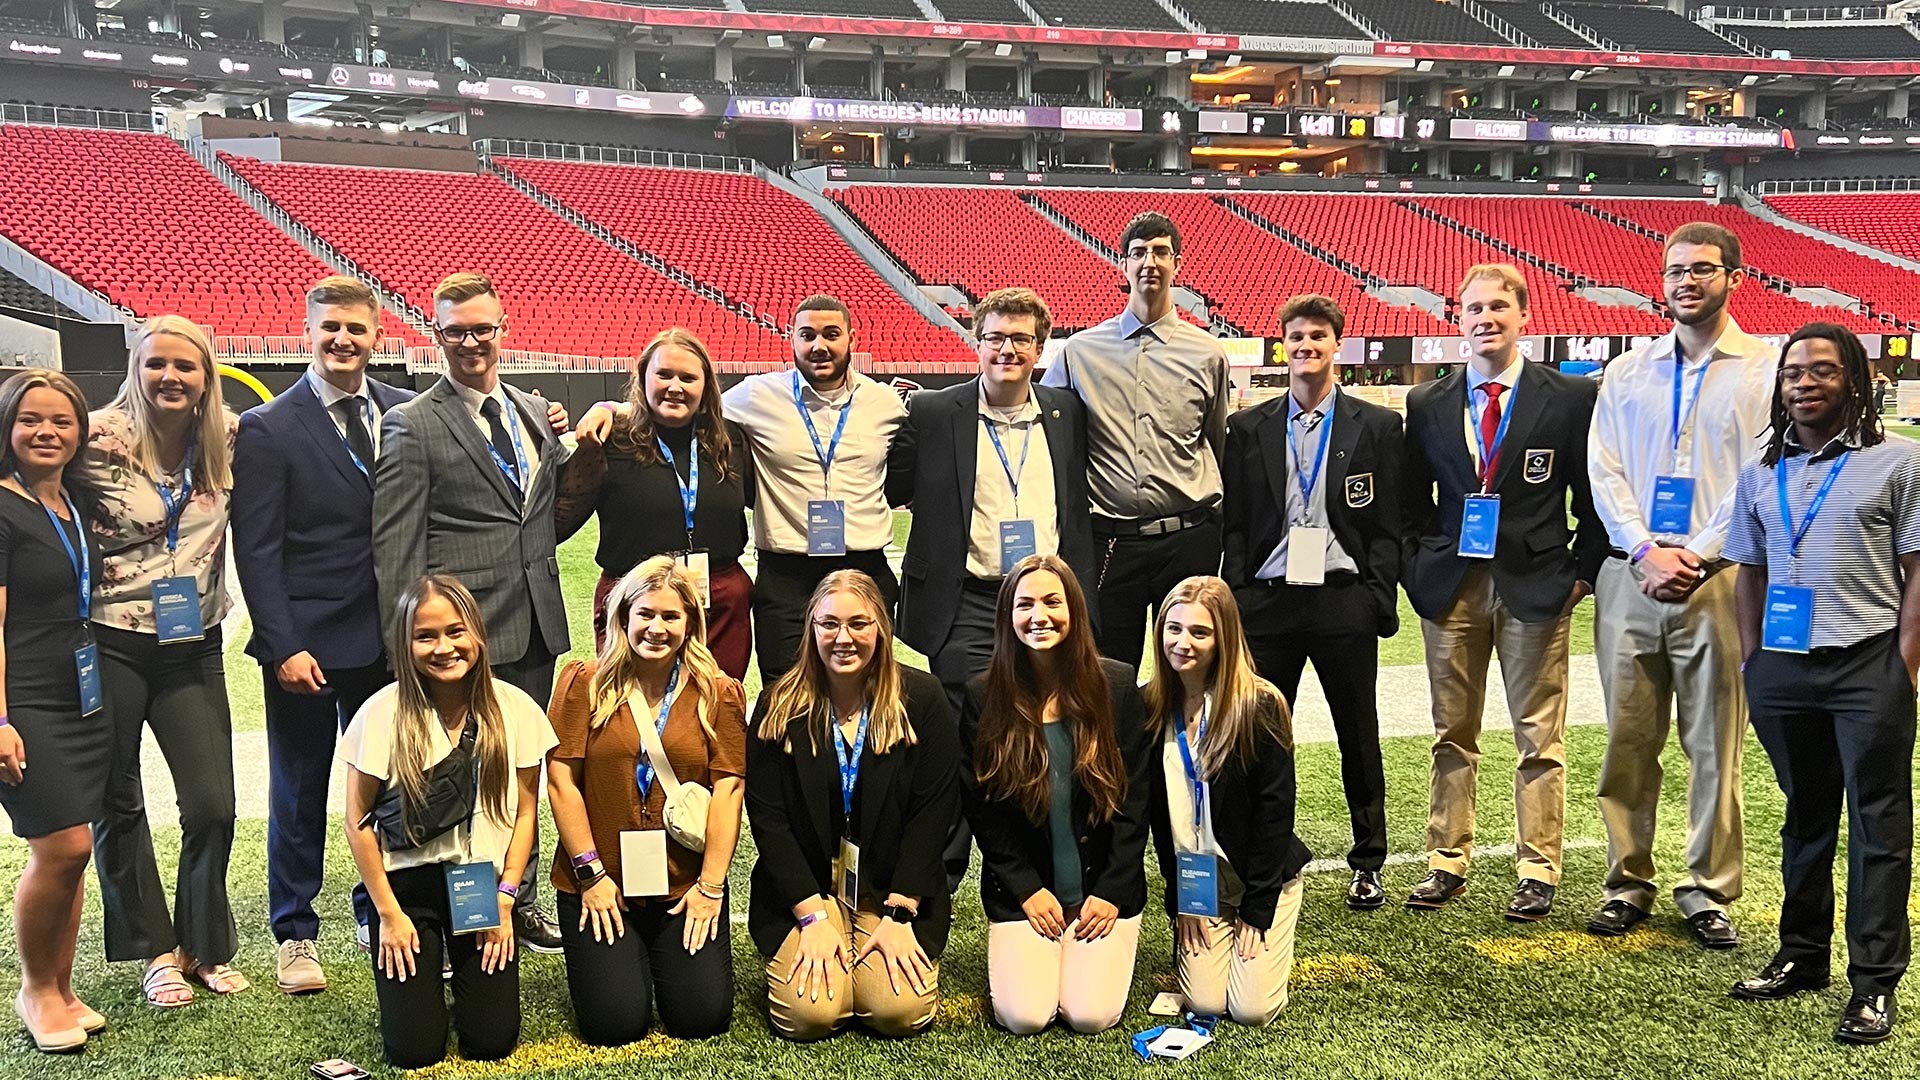 Student members of JWU's DECA NSO chapter pose together at a stadium in Atlanta, Georgia while attending the 2022 Collegiate DECA Engage Conference